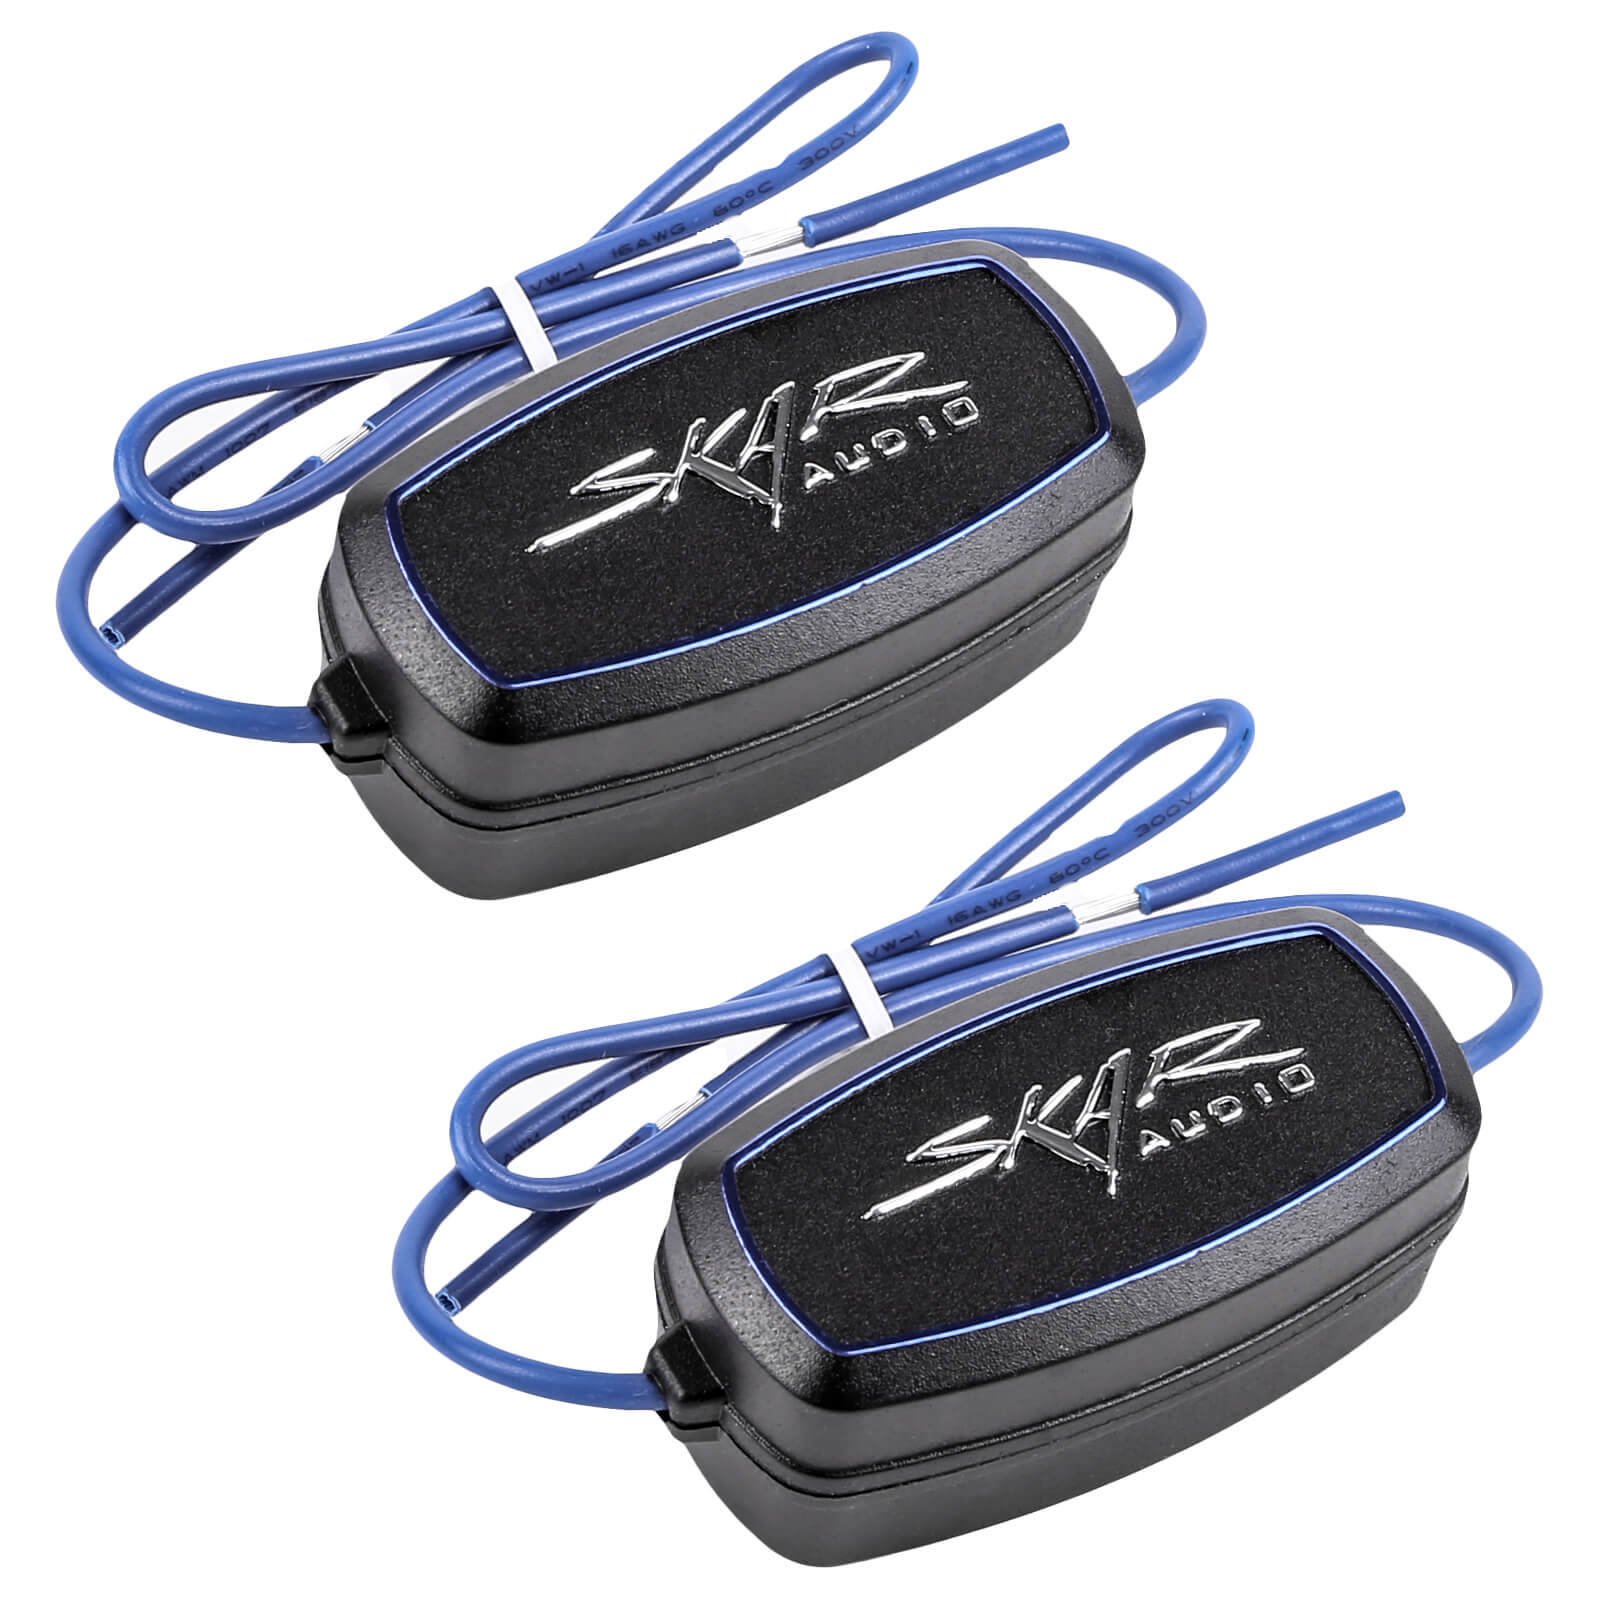 Skar Audio Elite Frequency Filters | Eliminates Frequencies 0-300 Hz at 4 Ohms - Pair